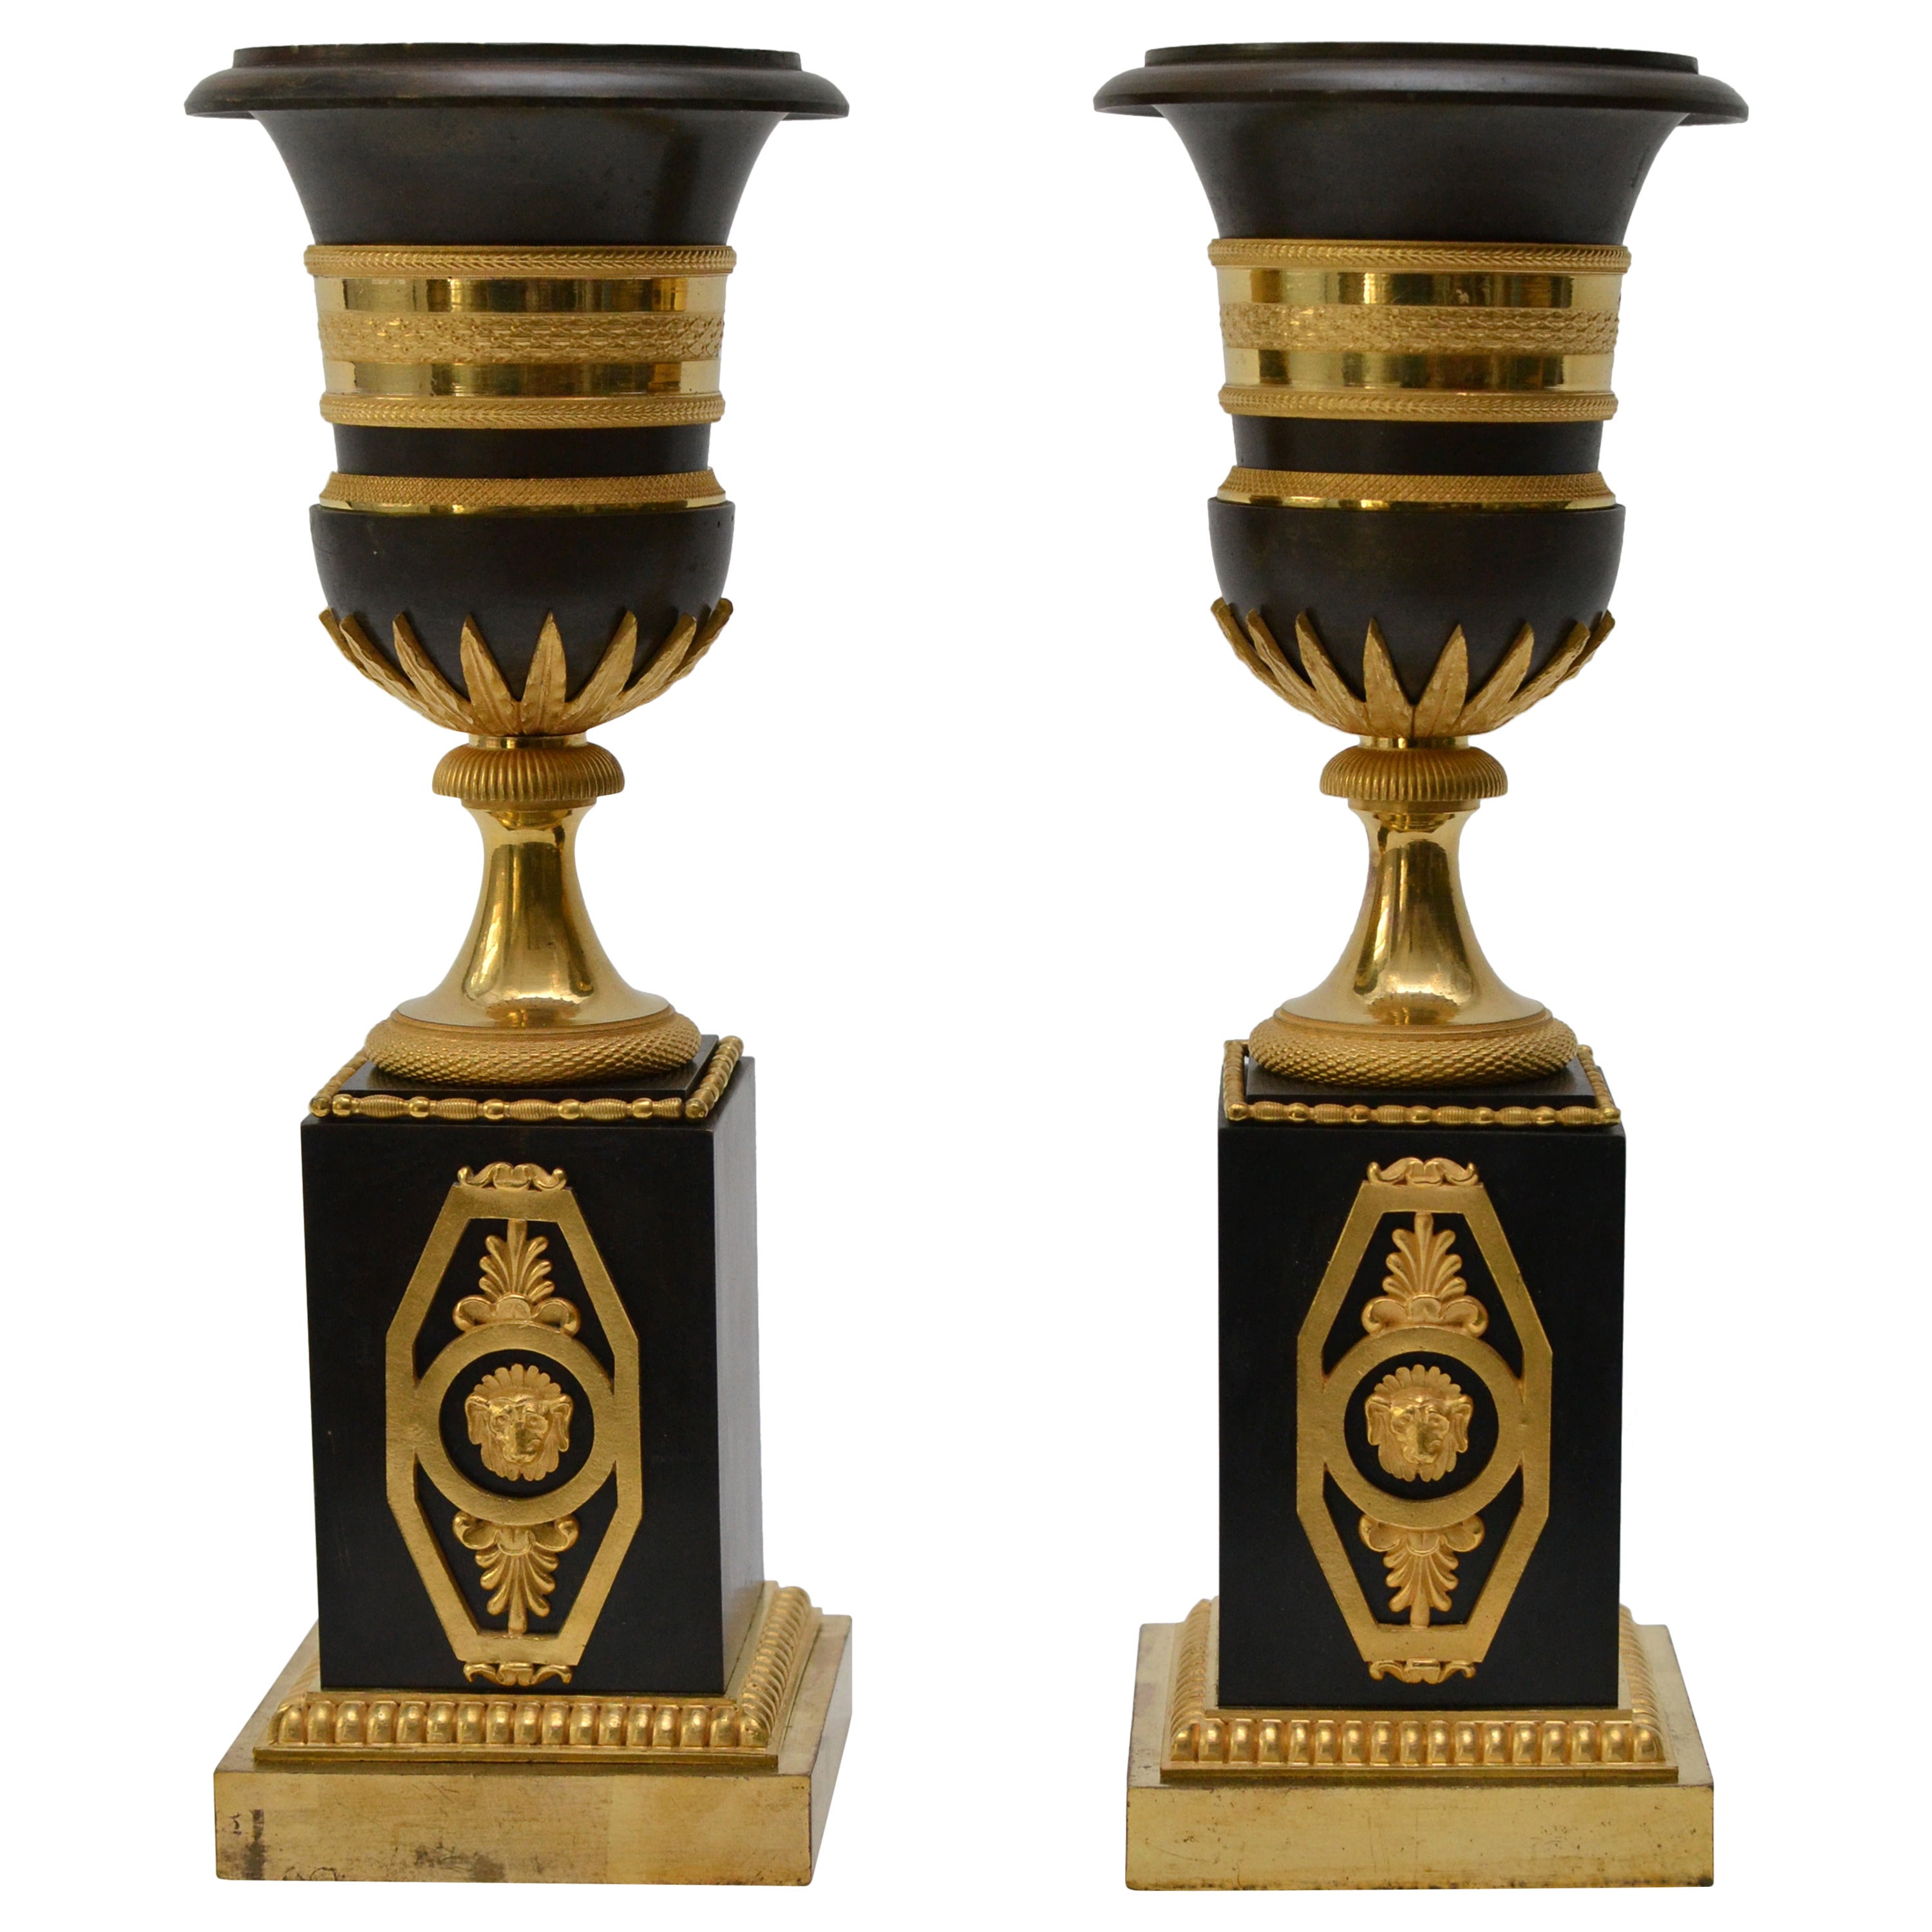 Pair of Gilt Bronze Empire Urn Shaped Candlesticks, Early 19th Century